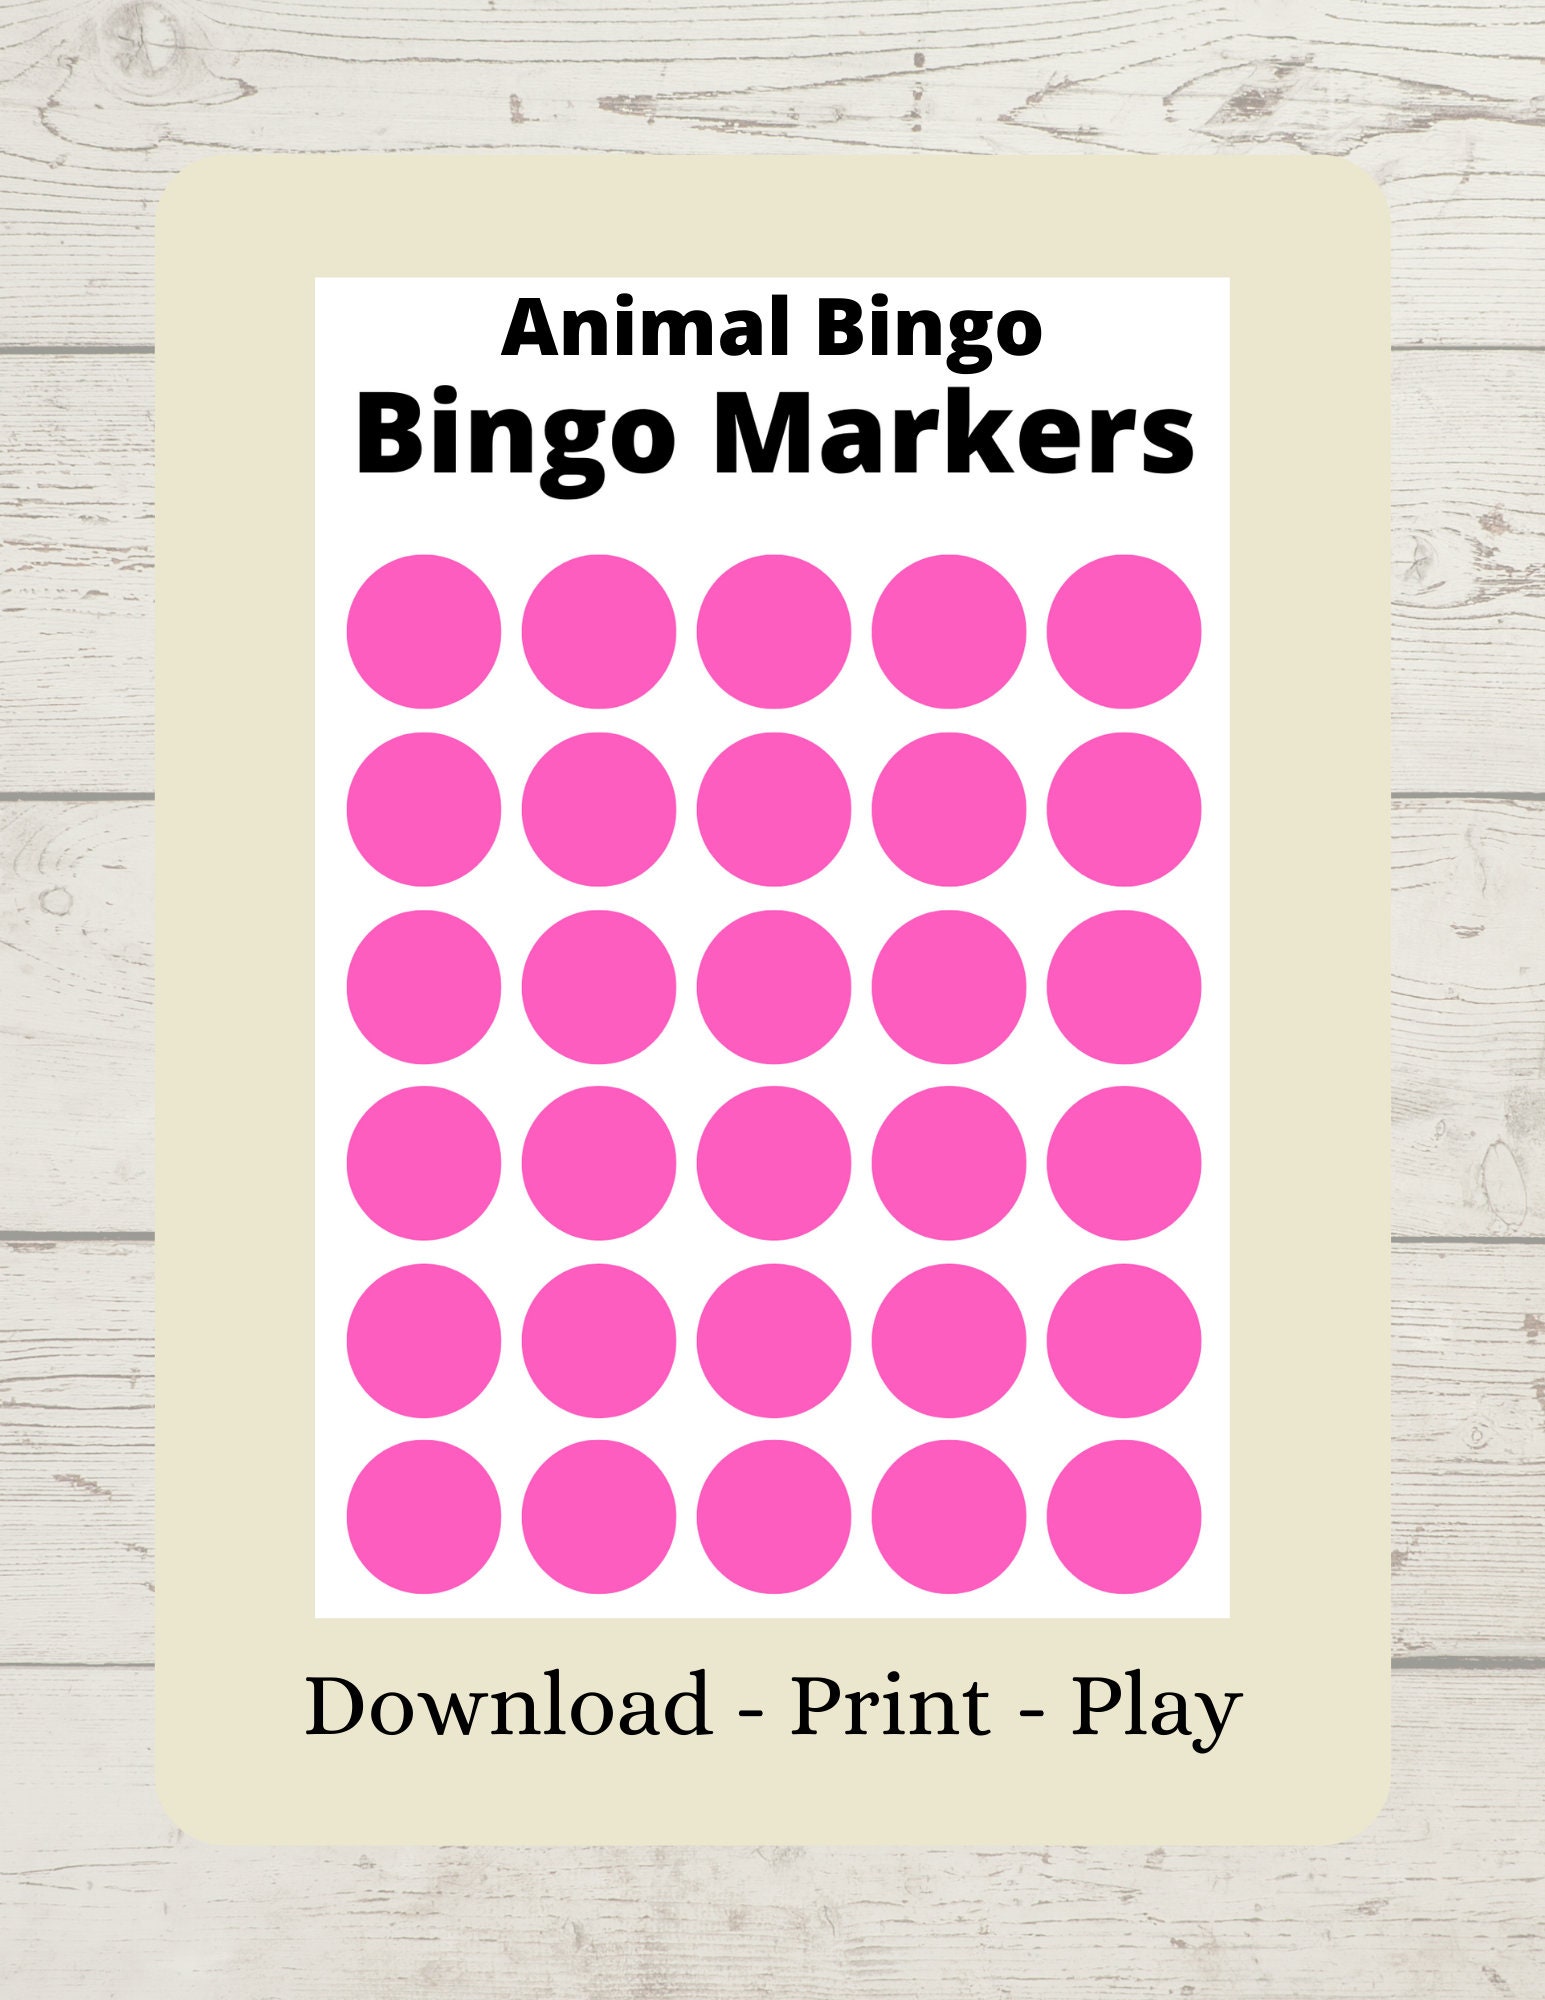 BINGO Markers • FREE Printable Game from PrimaryGames